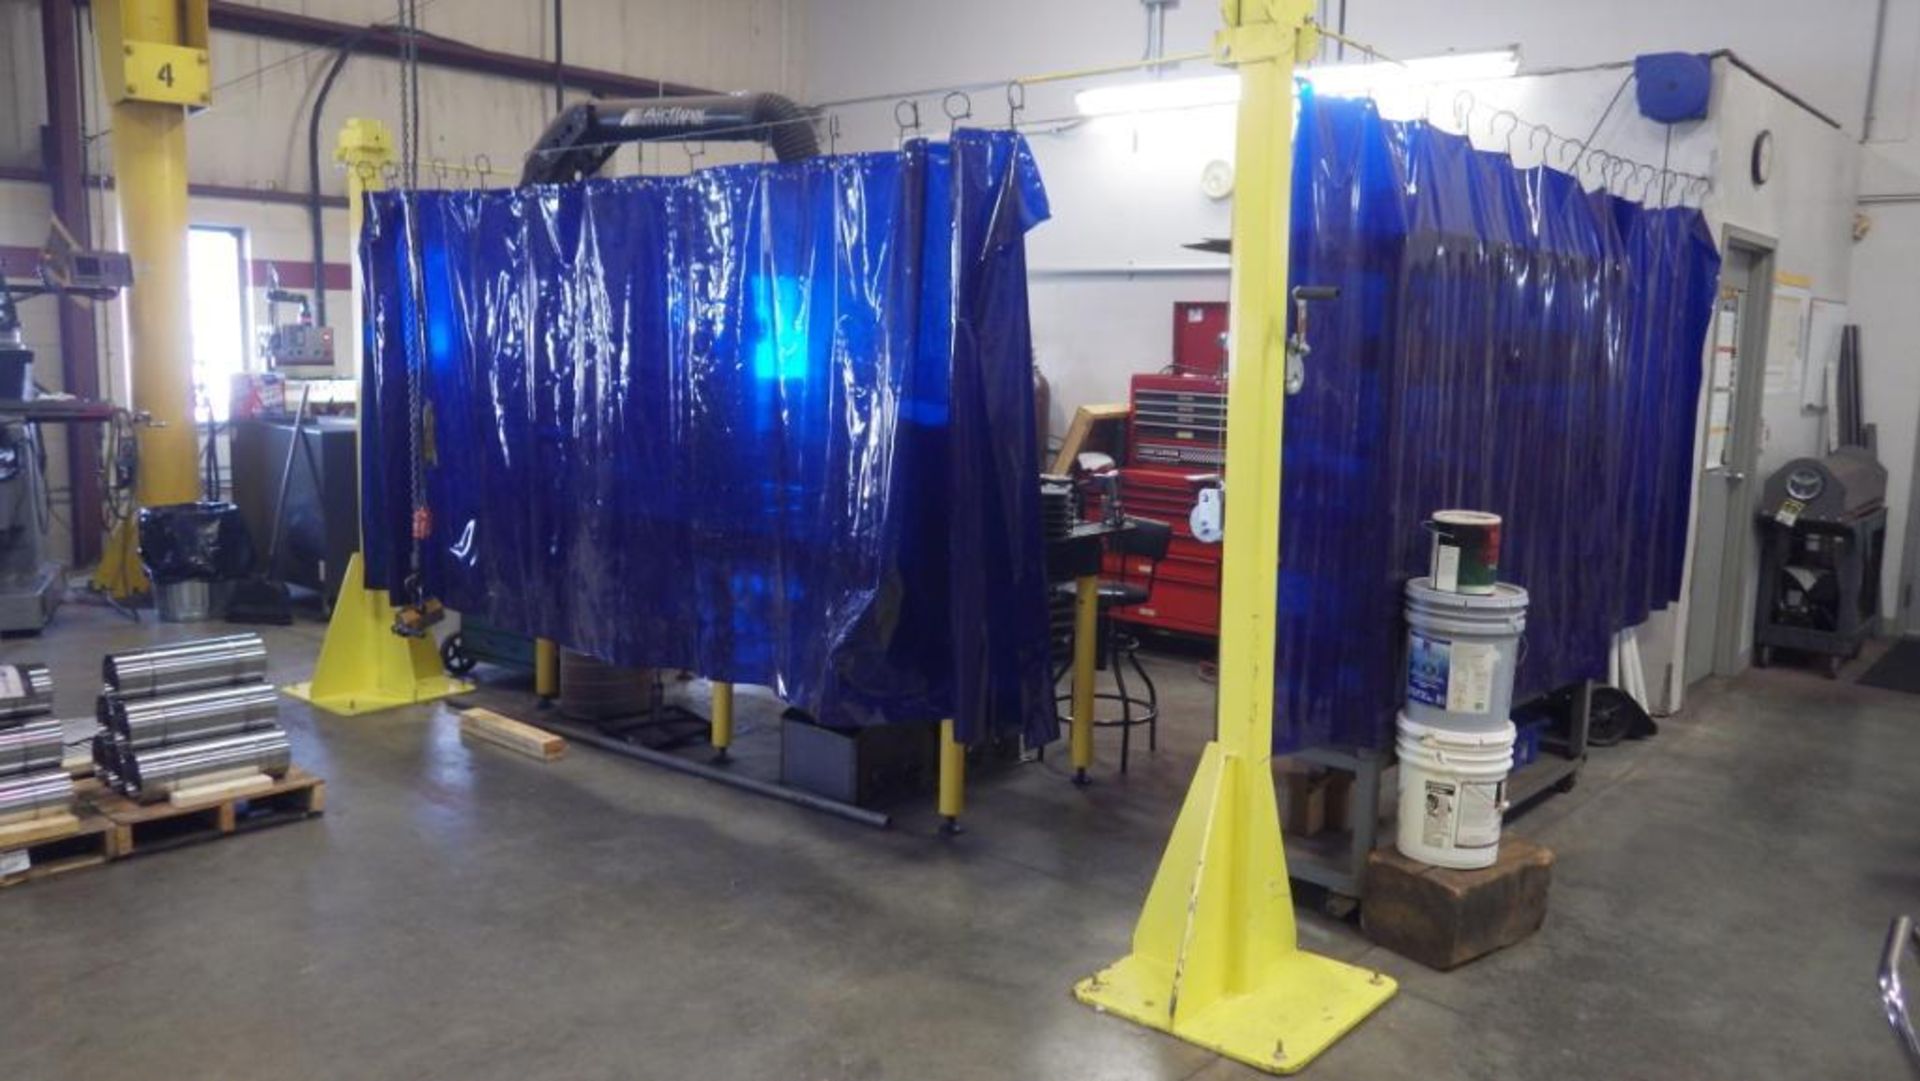 Lot c/o: Assorted Welding Curtains c/o: (4) Up rights 8' tall, (1) 66" X 12' lg curtain, (1) 66" X 8